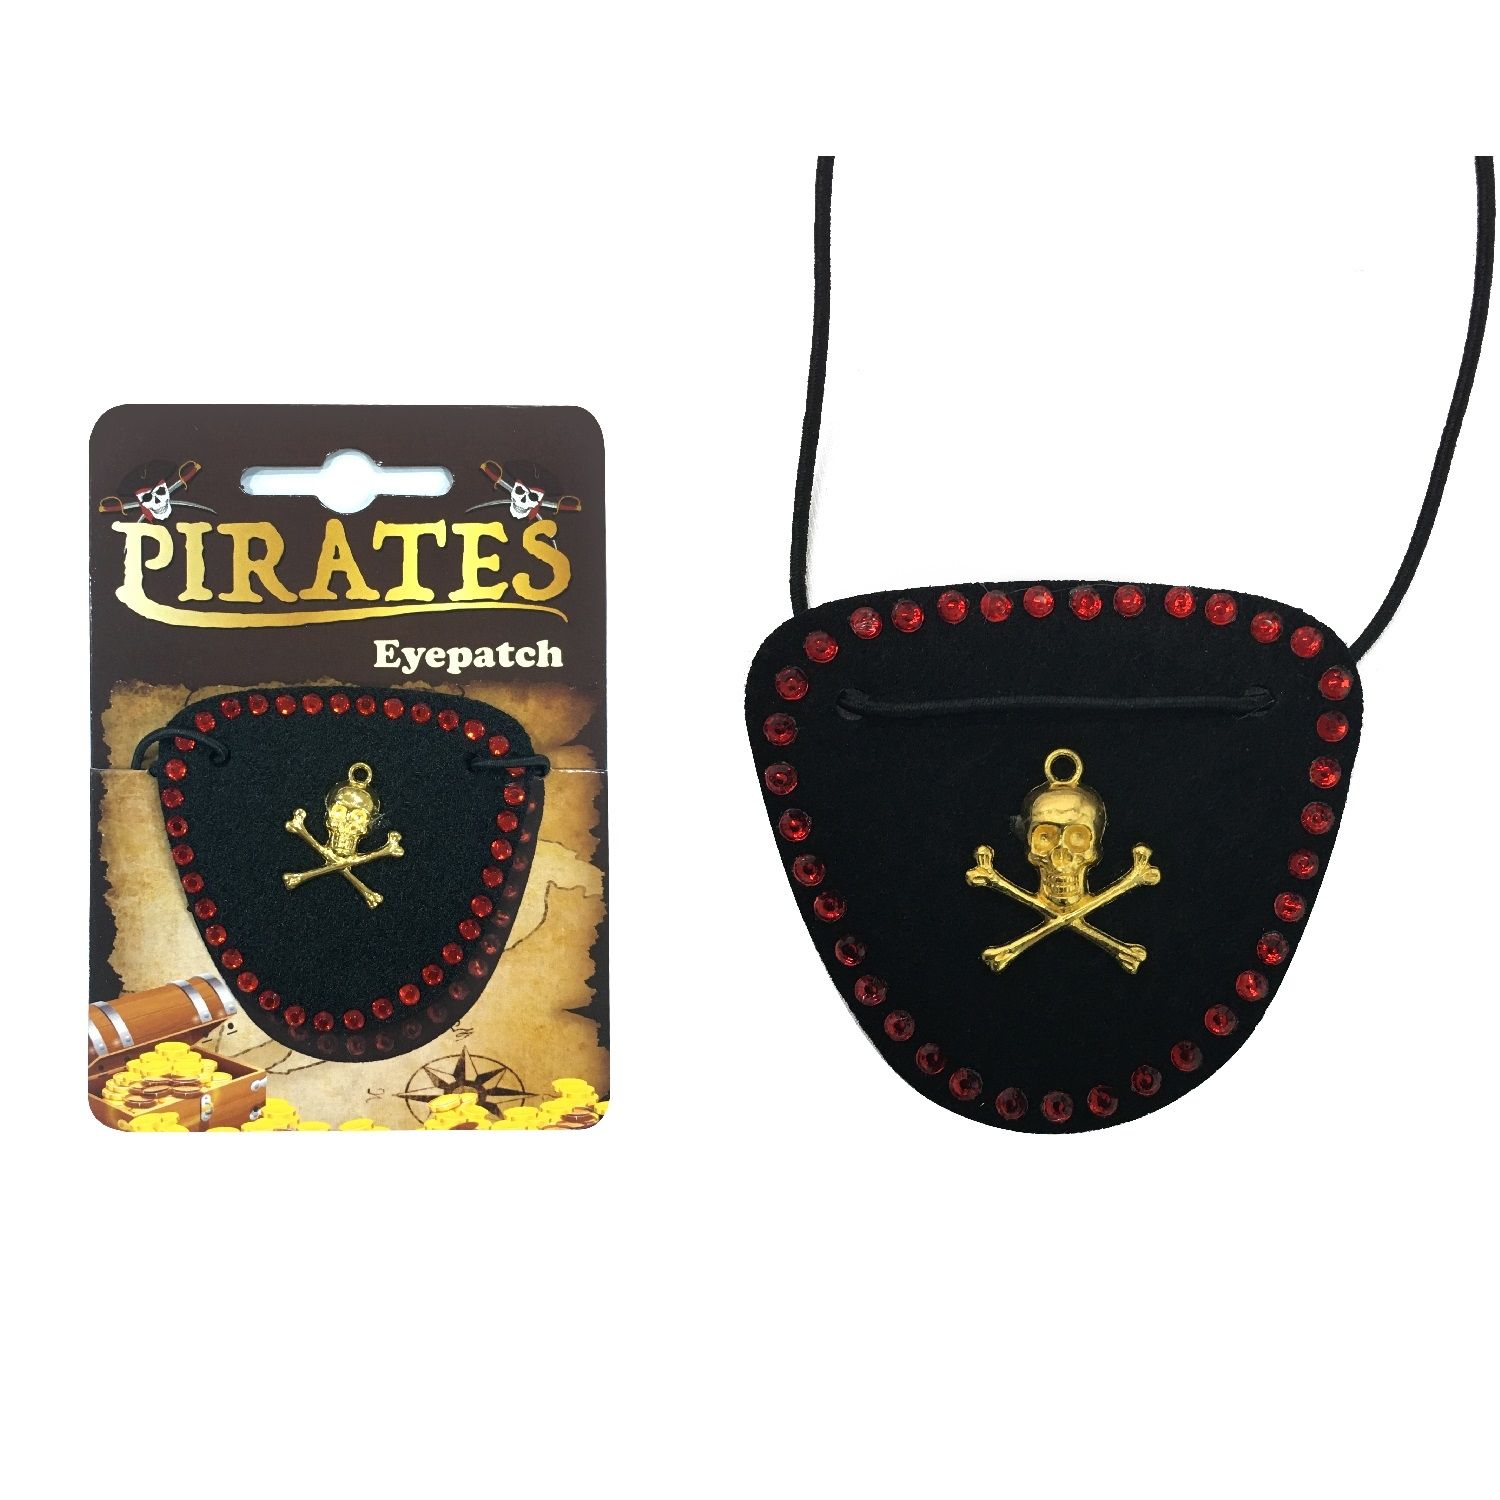 LADY PIRATE EYEPATCH 2 ASSORTED